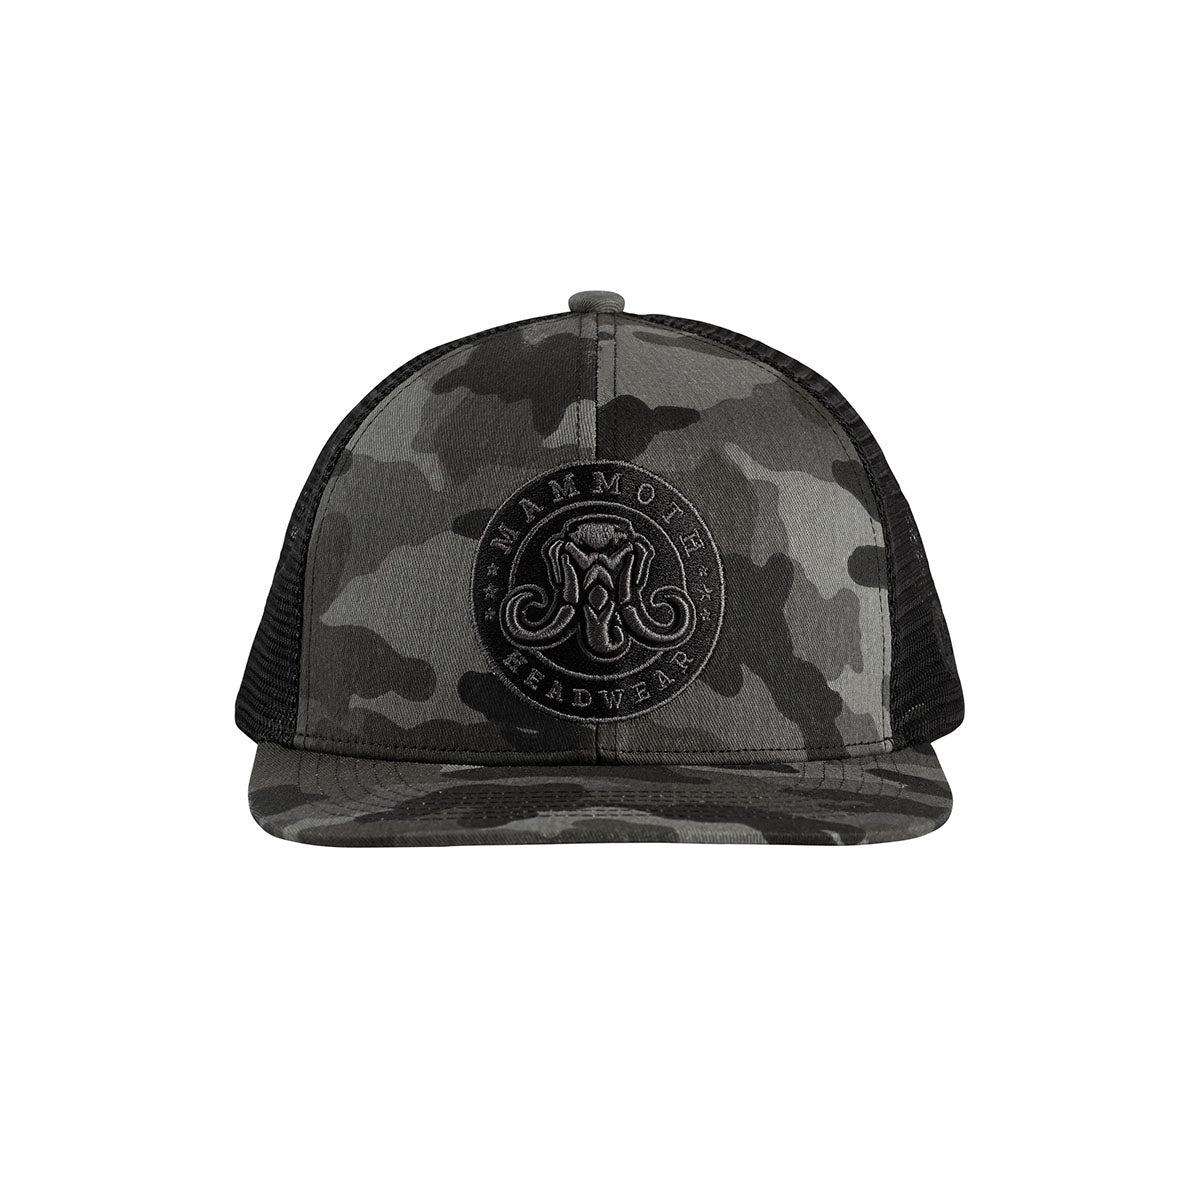 Elevate Tagged Your Headwear Style Accessories - Premium Mammoth and Hats - \